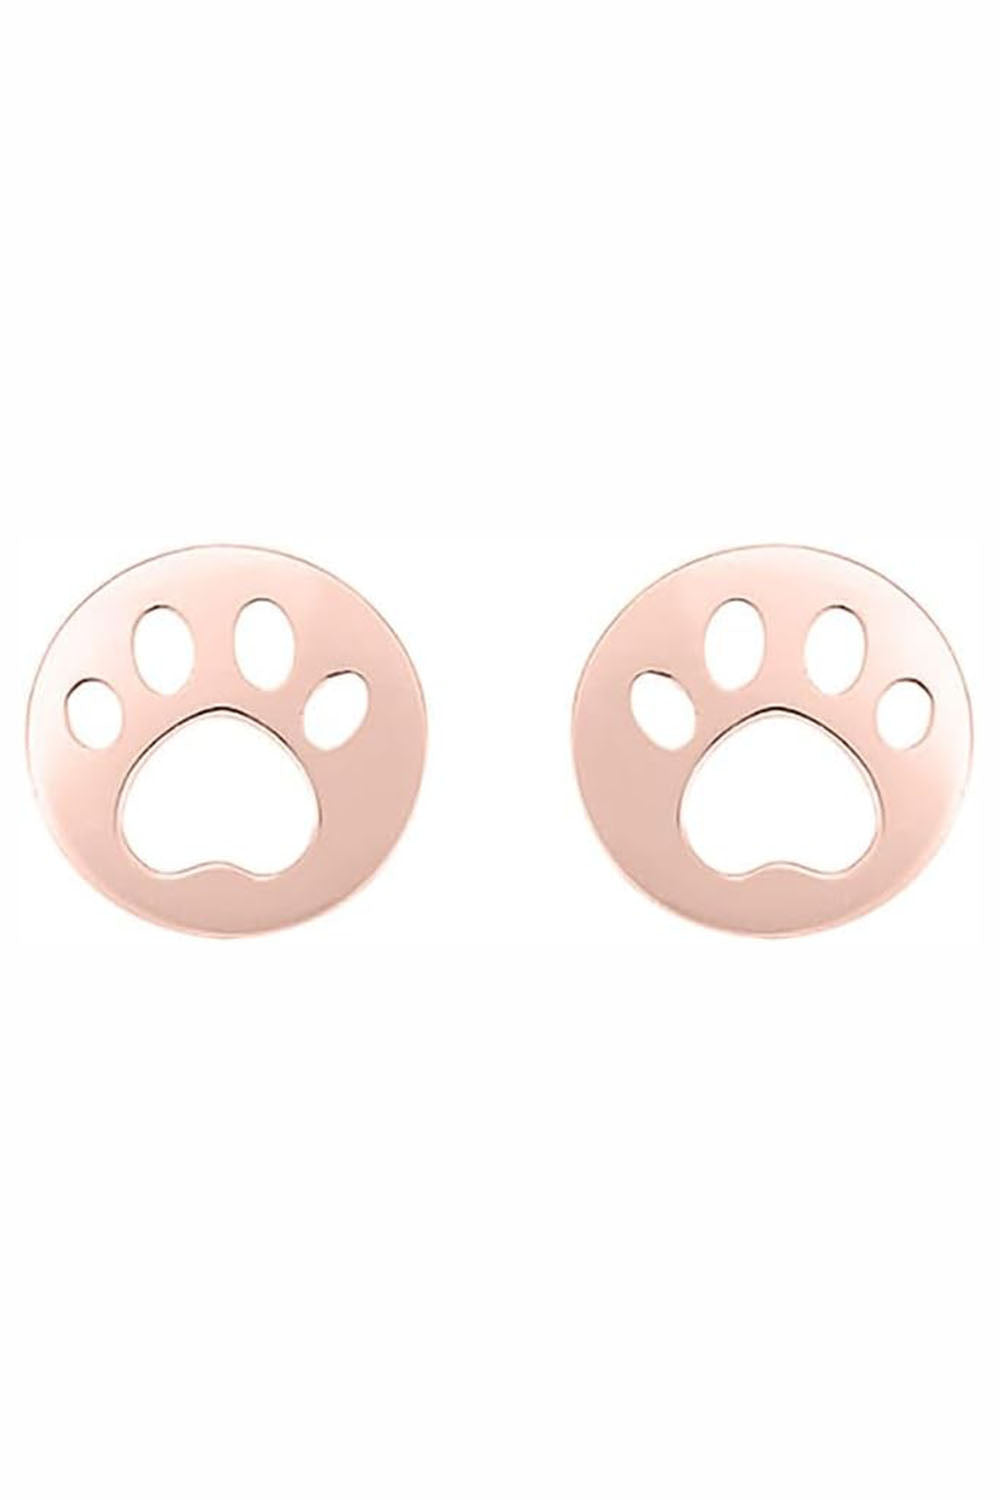 Rose Gold Color Paw Print Cutout Stud Earrings, Ear Studs for Women